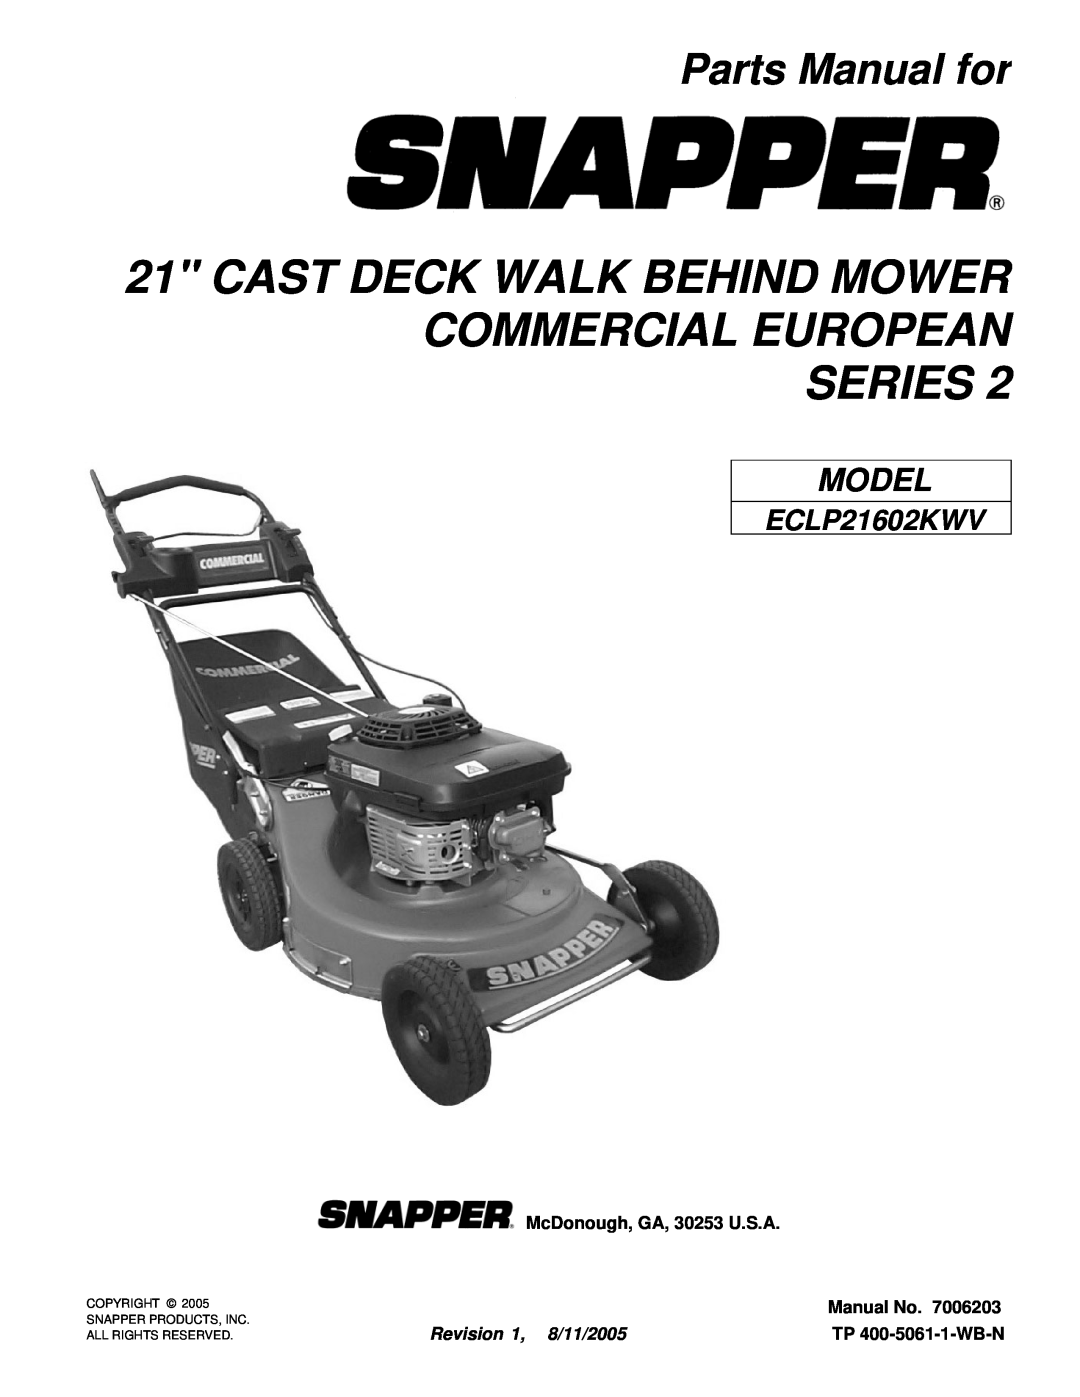 Snapper ECLP21602KWV important safety instructions Safety Instructions & Operator’s Manual for 